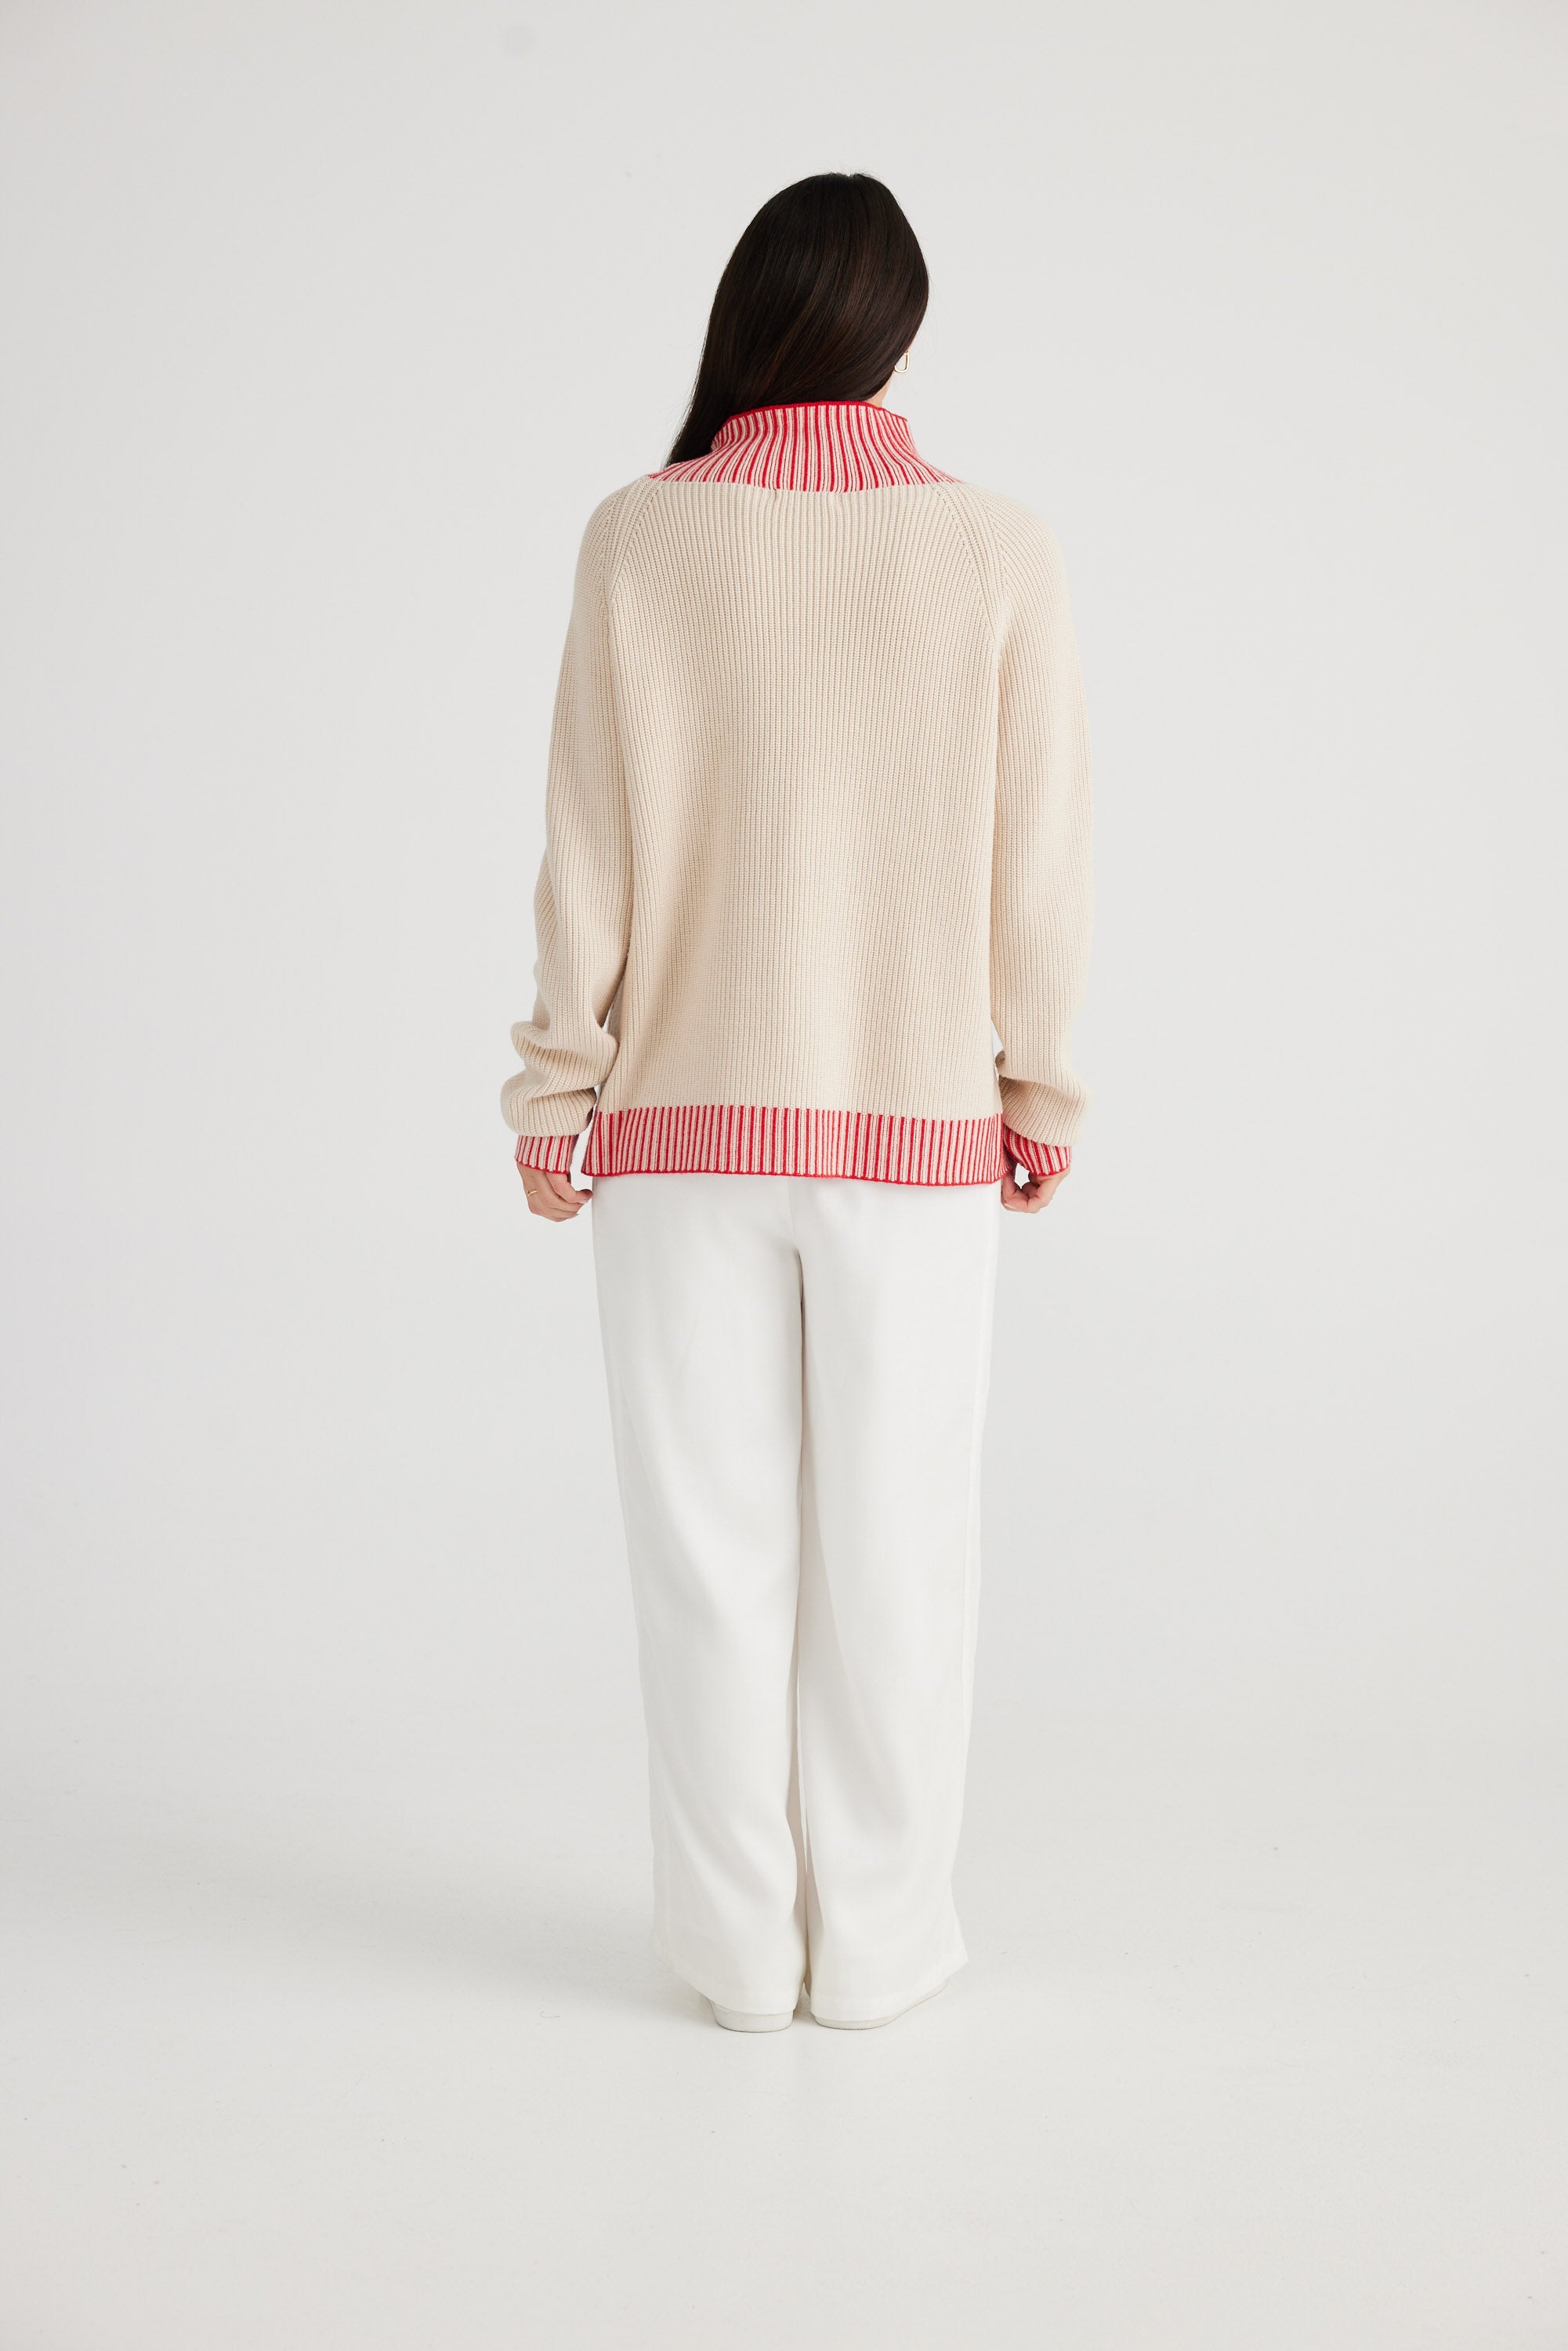 Alexis Knit Jumper - Red-Knitwear & Jumpers-Brave & True-The Bay Room